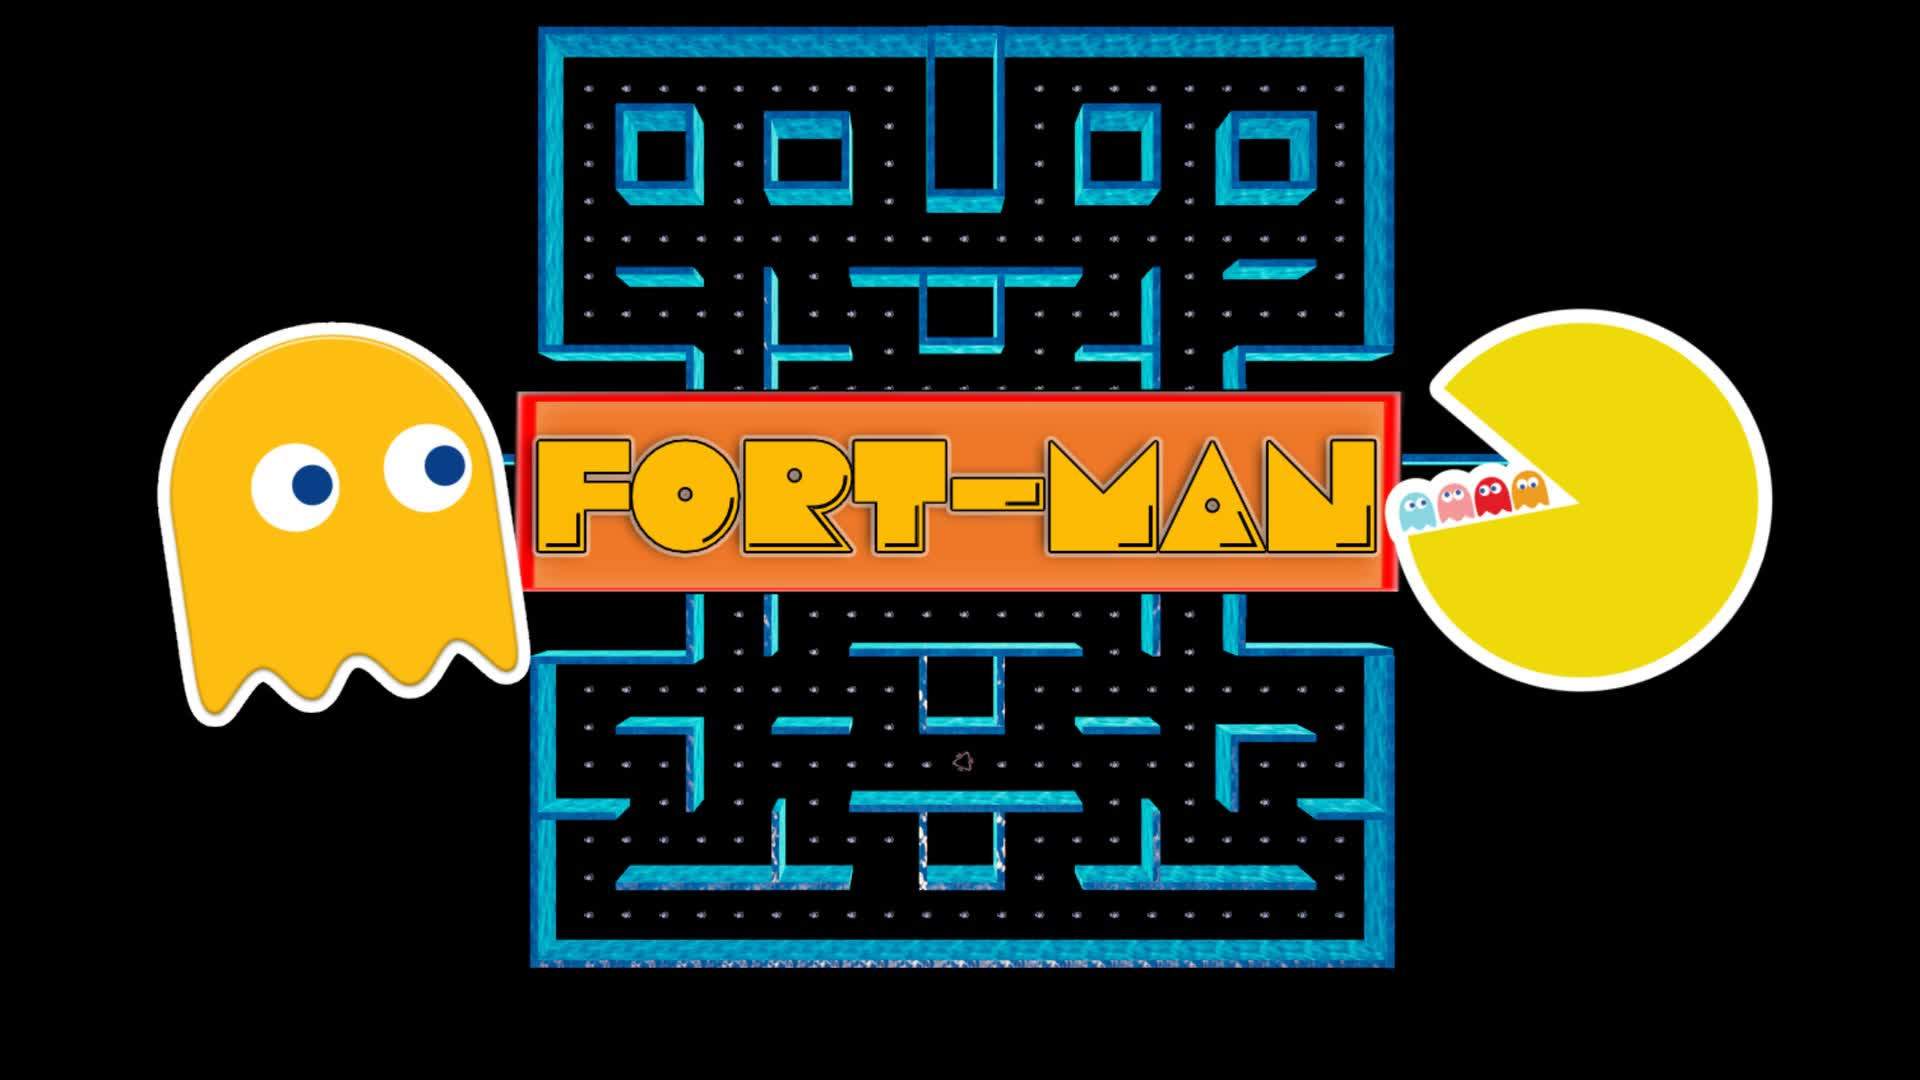 【2D】FORT-MAN 4 PLAYERS😄